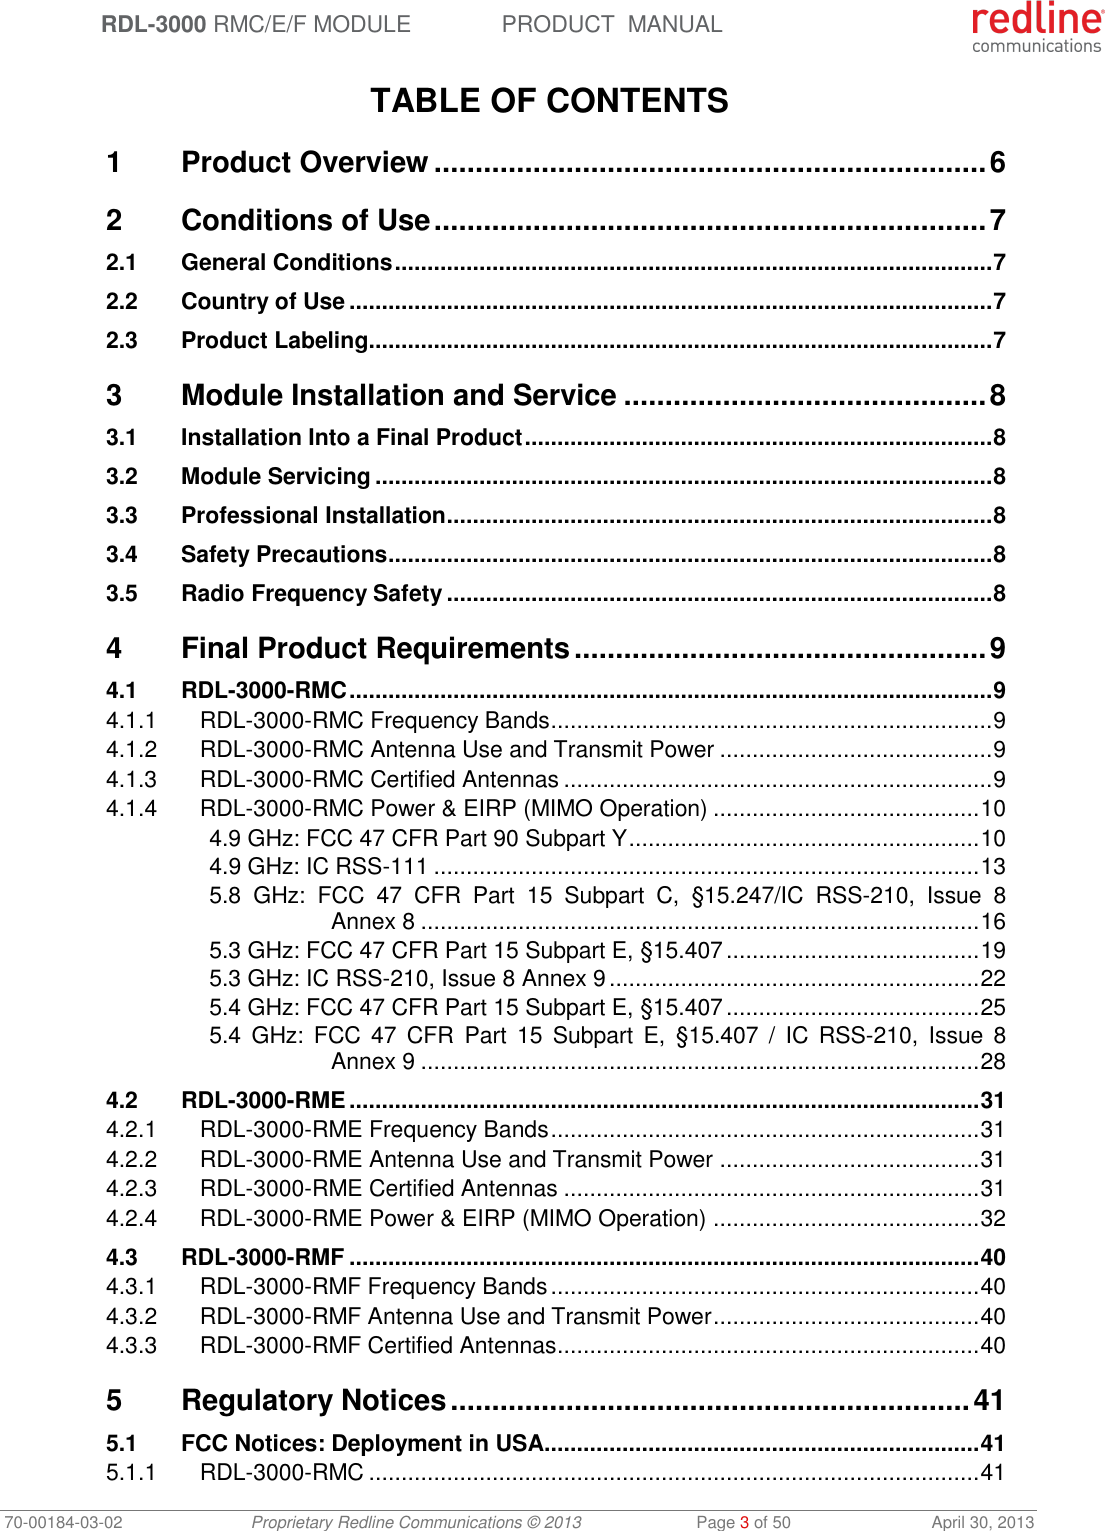  RDL-3000 RMC/E/F MODULE PRODUCT  MANUAL 70-00184-03-02 Proprietary Redline Communications © 2013  Page 3 of 50  April 30, 2013  TABLE OF CONTENTS 1 Product Overview ................................................................... 6 2 Conditions of Use ................................................................... 7 2.1 General Conditions ............................................................................................ 7 2.2 Country of Use ................................................................................................... 7 2.3 Product Labeling ................................................................................................ 7 3 Module Installation and Service ............................................ 8 3.1 Installation Into a Final Product ........................................................................ 8 3.2 Module Servicing ............................................................................................... 8 3.3 Professional Installation .................................................................................... 8 3.4 Safety Precautions ............................................................................................. 8 3.5 Radio Frequency Safety .................................................................................... 8 4 Final Product Requirements .................................................. 9 4.1 RDL-3000-RMC ................................................................................................... 9 4.1.1 RDL-3000-RMC Frequency Bands .................................................................... 9 4.1.2 RDL-3000-RMC Antenna Use and Transmit Power .......................................... 9 4.1.3 RDL-3000-RMC Certified Antennas .................................................................. 9 4.1.4 RDL-3000-RMC Power &amp; EIRP (MIMO Operation) ......................................... 10 4.9 GHz: FCC 47 CFR Part 90 Subpart Y ...................................................... 10 4.9 GHz: IC RSS-111 .................................................................................... 13 5.8  GHz:  FCC  47  CFR  Part  15  Subpart  C,  §15.247/IC  RSS-210,  Issue  8 Annex 8 ...................................................................................... 16 5.3 GHz: FCC 47 CFR Part 15 Subpart E, §15.407 ....................................... 19 5.3 GHz: IC RSS-210, Issue 8 Annex 9 ......................................................... 22 5.4 GHz: FCC 47 CFR Part 15 Subpart E, §15.407 ....................................... 25 5.4  GHz:  FCC  47  CFR  Part  15 Subpart  E,  §15.407  /  IC  RSS-210,  Issue 8 Annex 9 ...................................................................................... 28 4.2 RDL-3000-RME ................................................................................................. 31 4.2.1 RDL-3000-RME Frequency Bands .................................................................. 31 4.2.2 RDL-3000-RME Antenna Use and Transmit Power ........................................ 31 4.2.3 RDL-3000-RME Certified Antennas ................................................................ 31 4.2.4 RDL-3000-RME Power &amp; EIRP (MIMO Operation) ......................................... 32 4.3 RDL-3000-RMF ................................................................................................. 40 4.3.1 RDL-3000-RMF Frequency Bands .................................................................. 40 4.3.2 RDL-3000-RMF Antenna Use and Transmit Power ......................................... 40 4.3.3 RDL-3000-RMF Certified Antennas ................................................................. 40 5 Regulatory Notices ............................................................... 41 5.1 FCC Notices: Deployment in USA ................................................................... 41 5.1.1 RDL-3000-RMC .............................................................................................. 41 